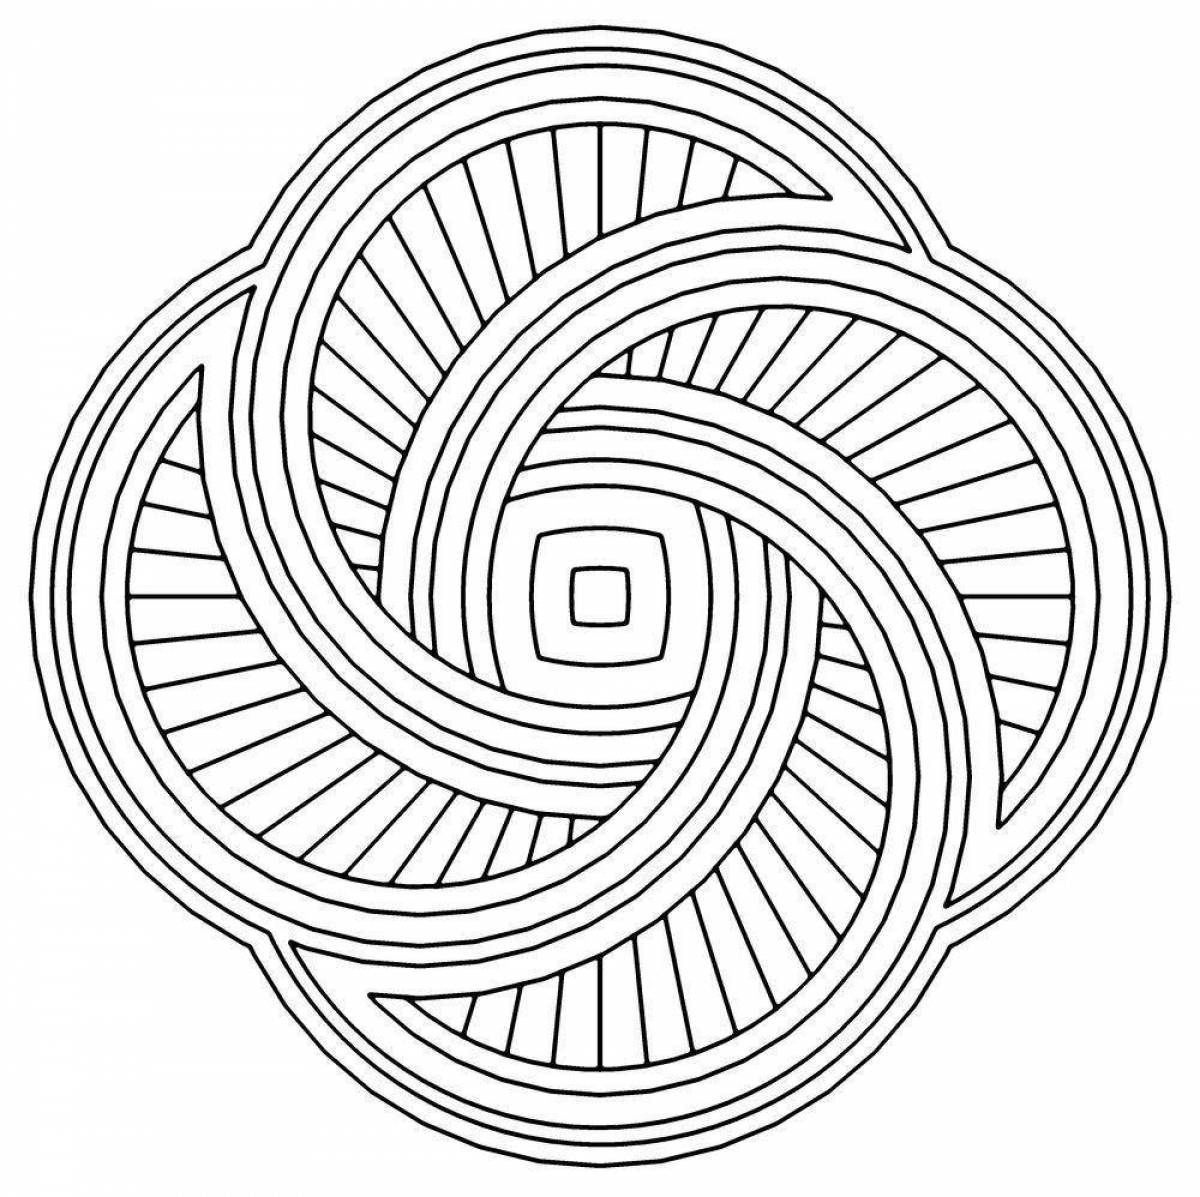 Radiant coloring page spiral unpainted